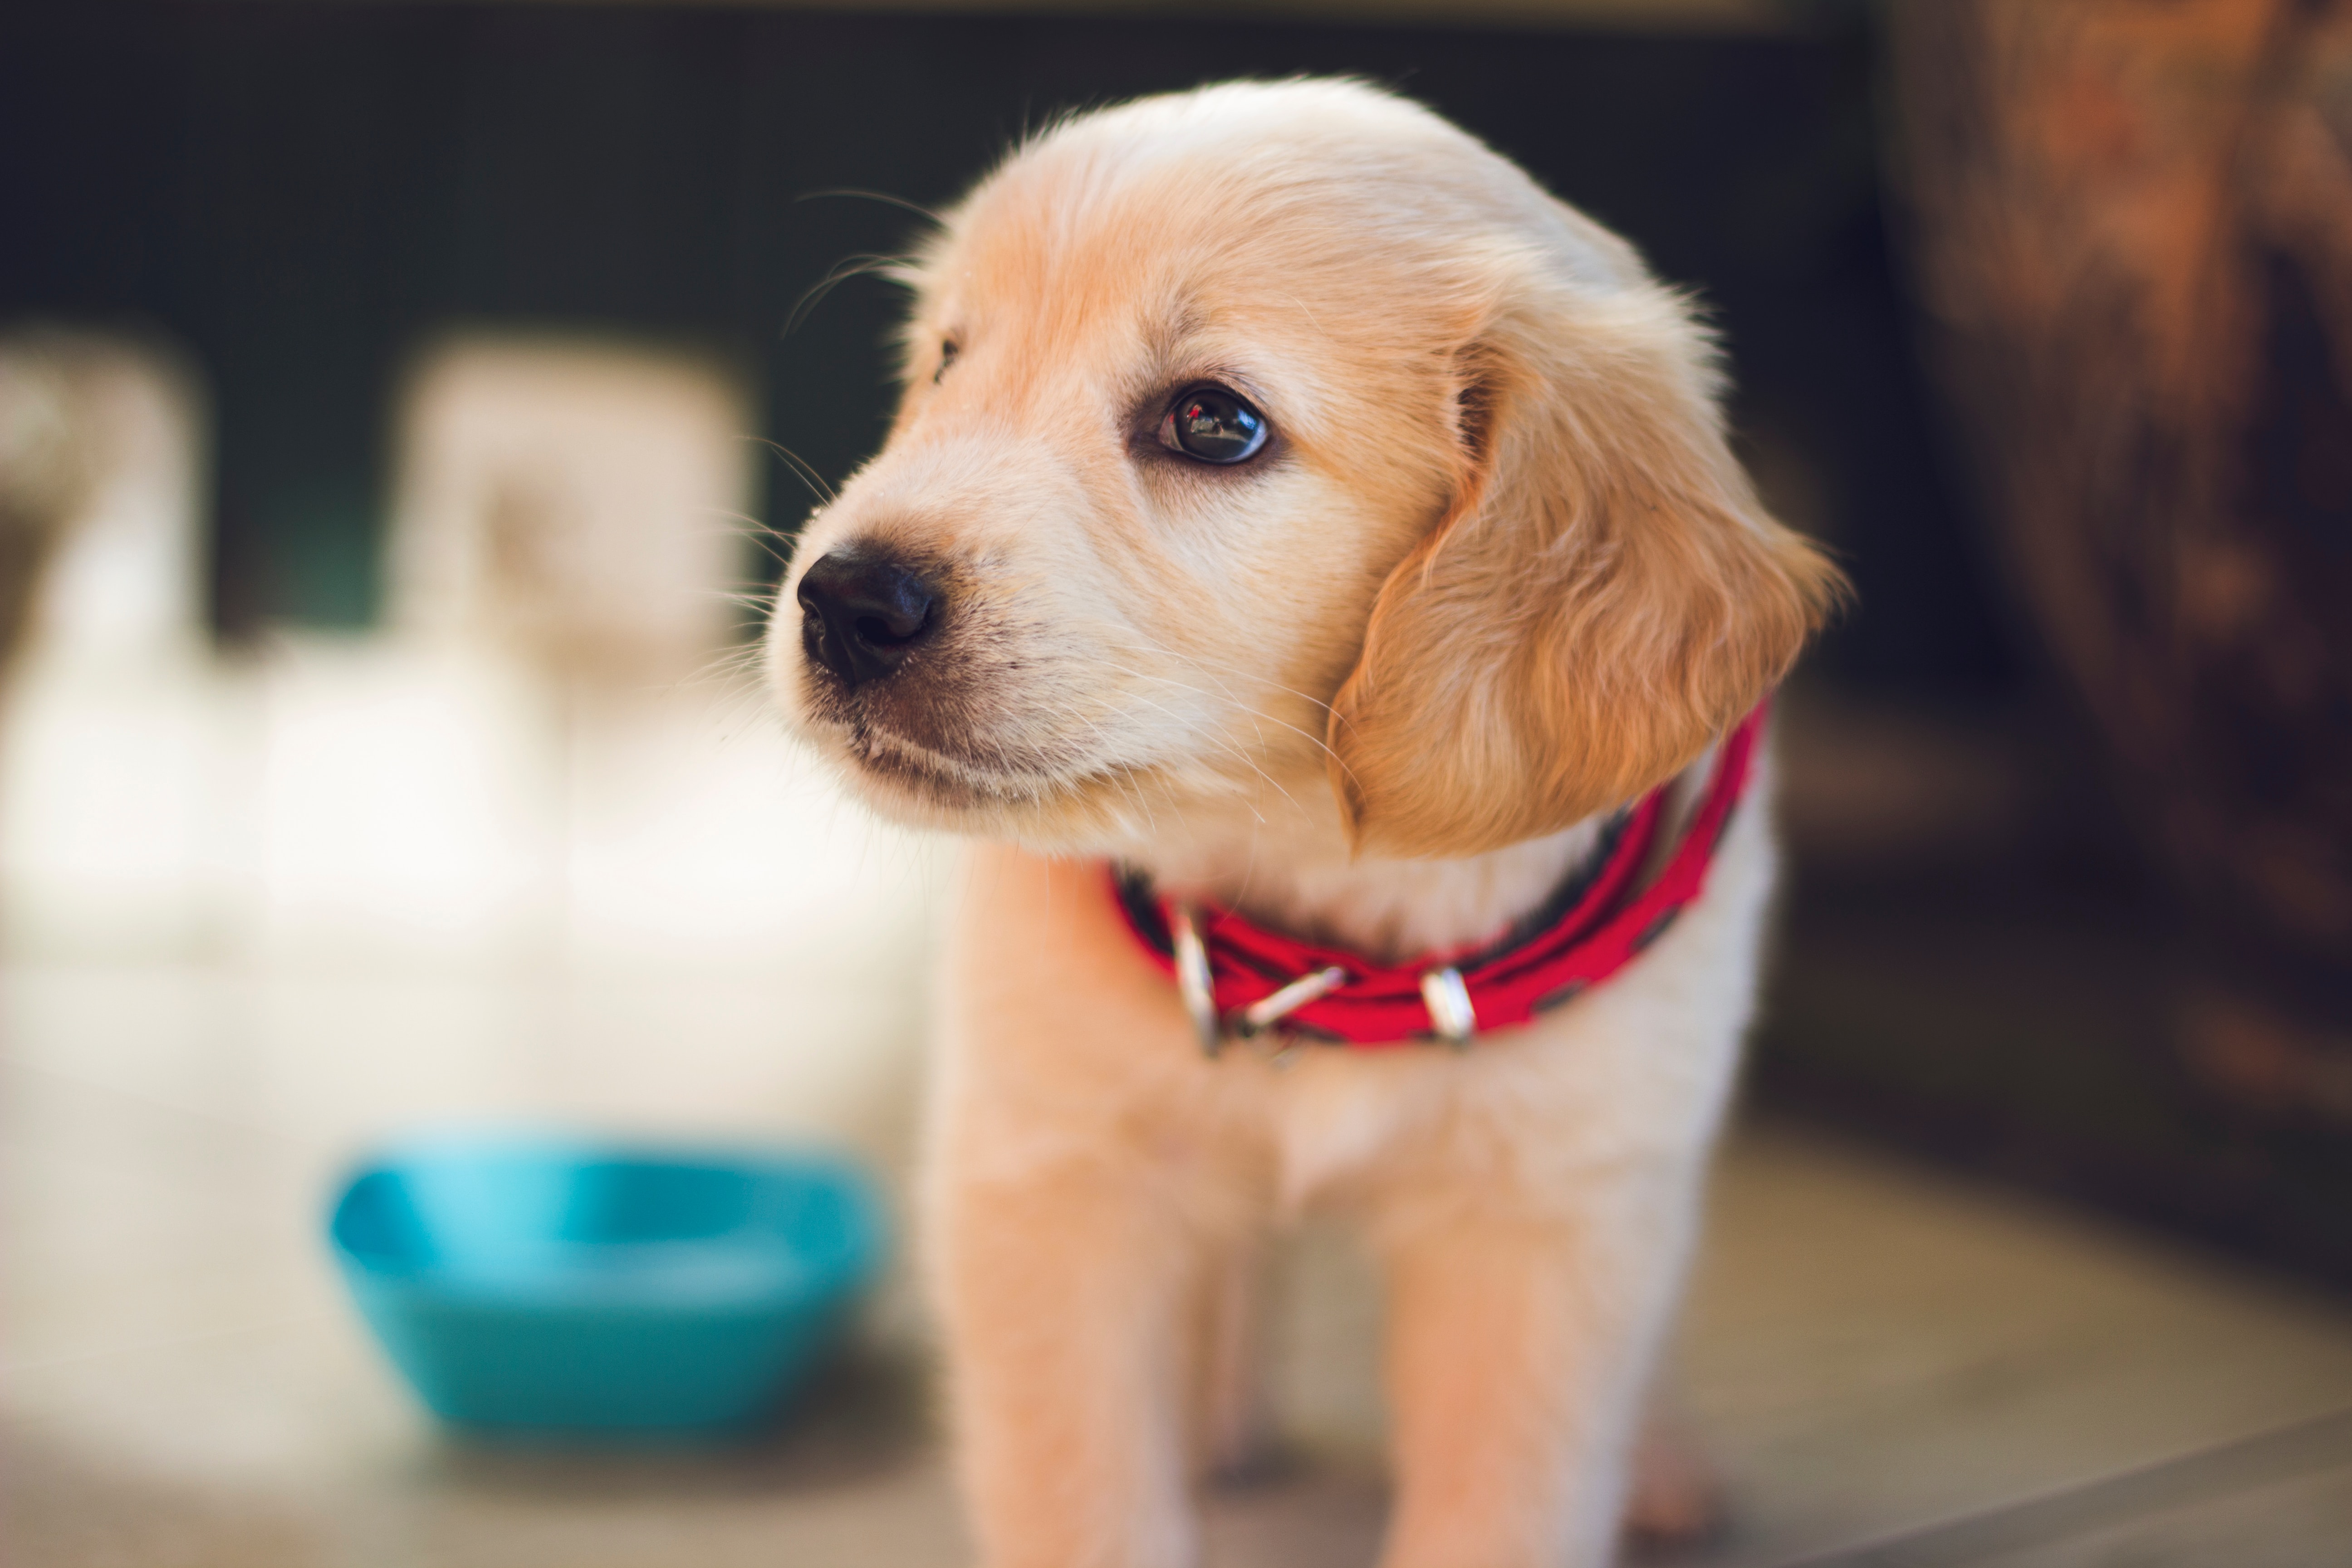 Digitizing the pet industry: Early Stage